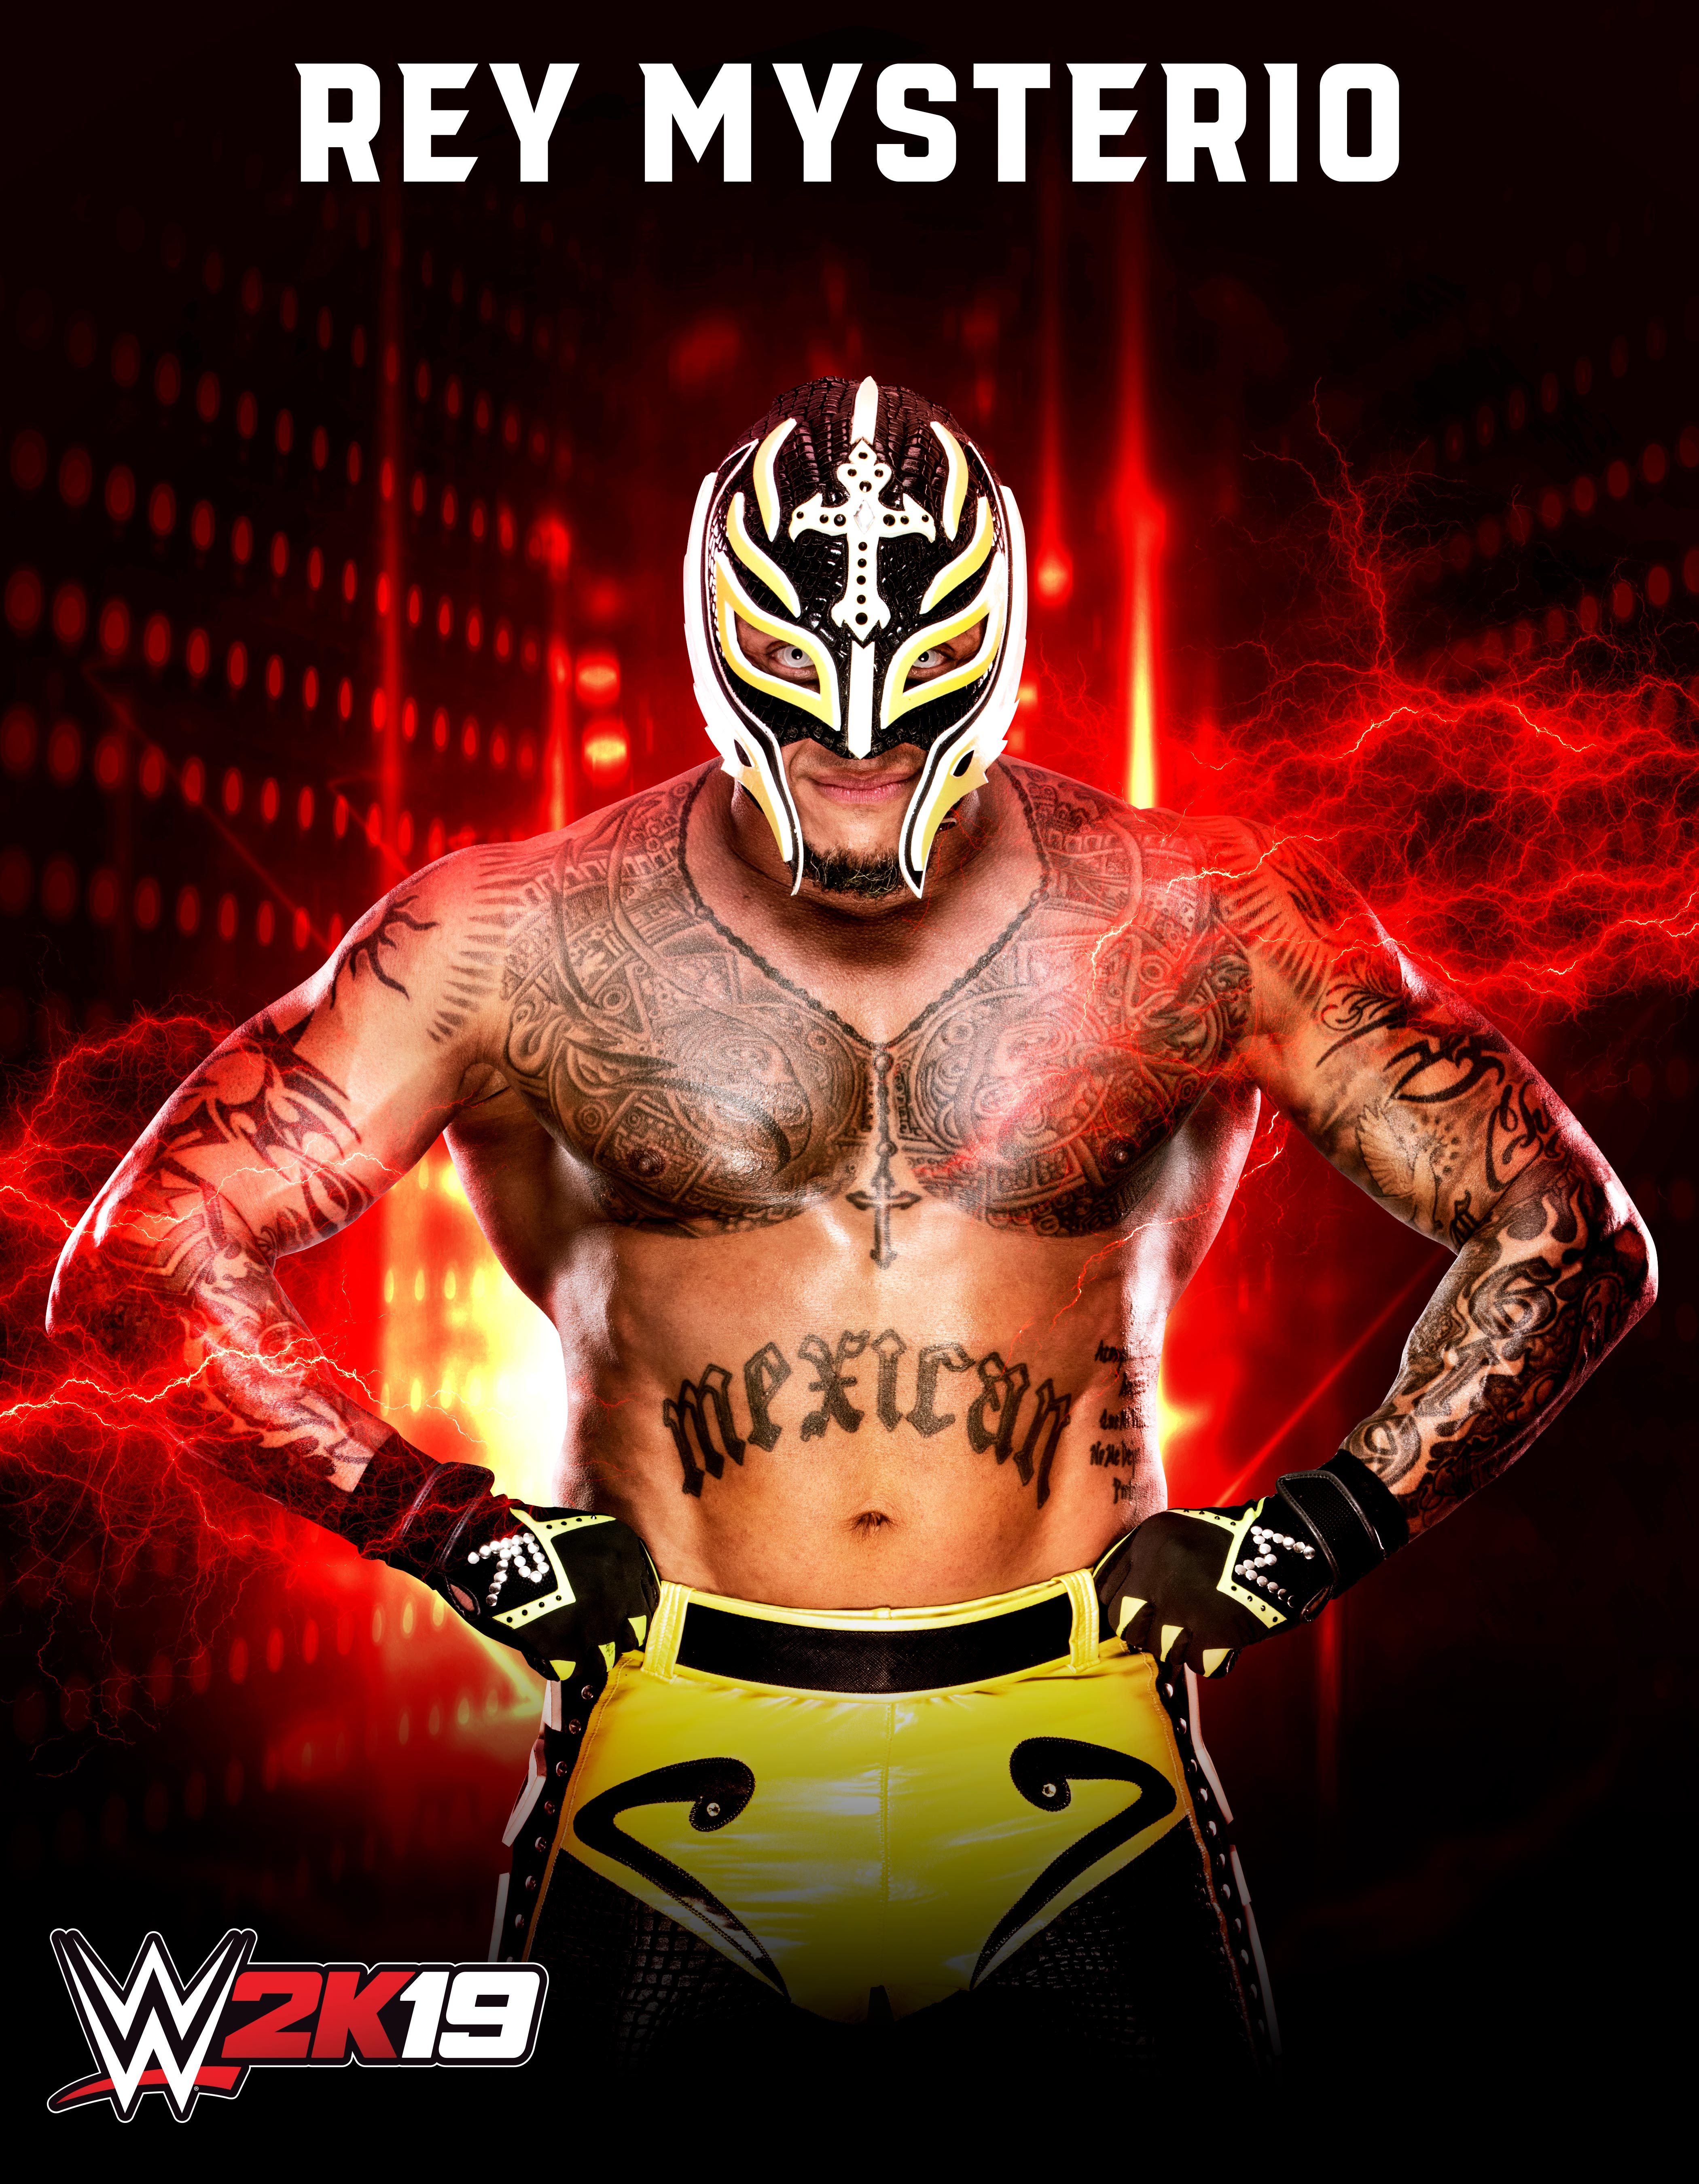 From The 619 Former Wwe Champion Rey Mysterio To Make Virtual